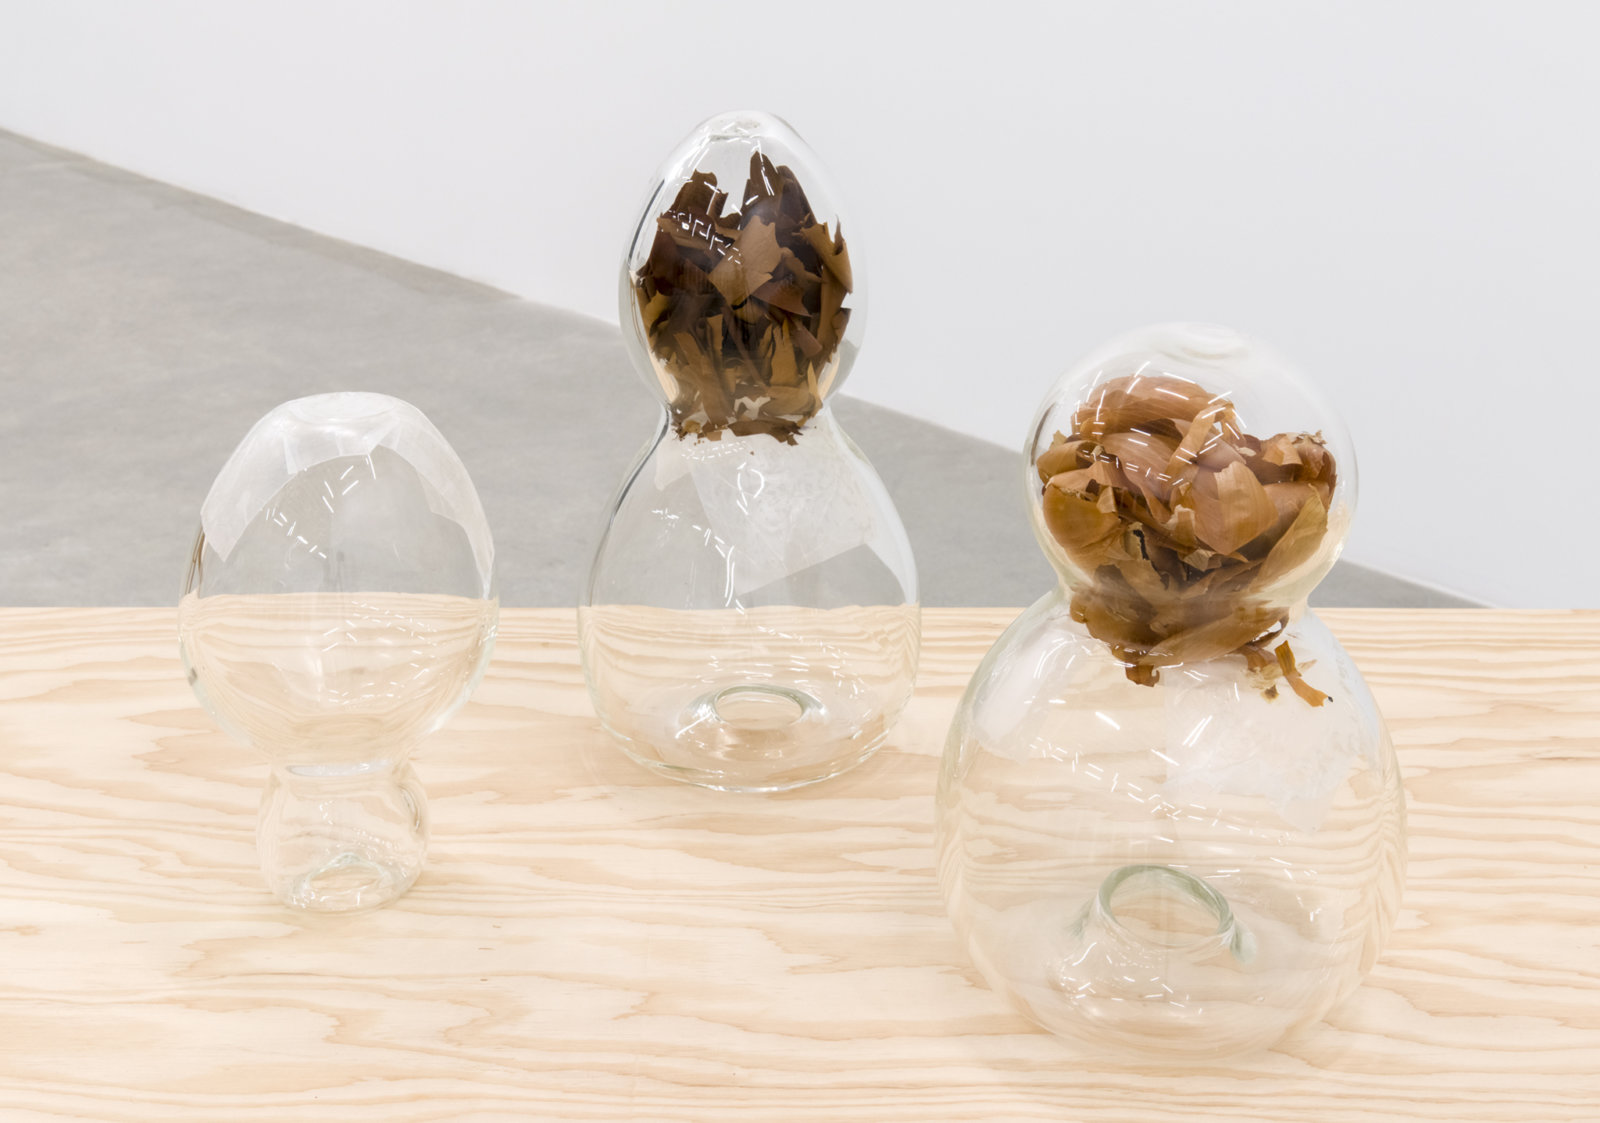 Christina Mackie, Ambic (detail), 2014, glass, parafilm, onionskins, madrona bark, chromatography paper and samples, fir, 47 x 96 x 96 in. (120 x 244 x 244 cm)